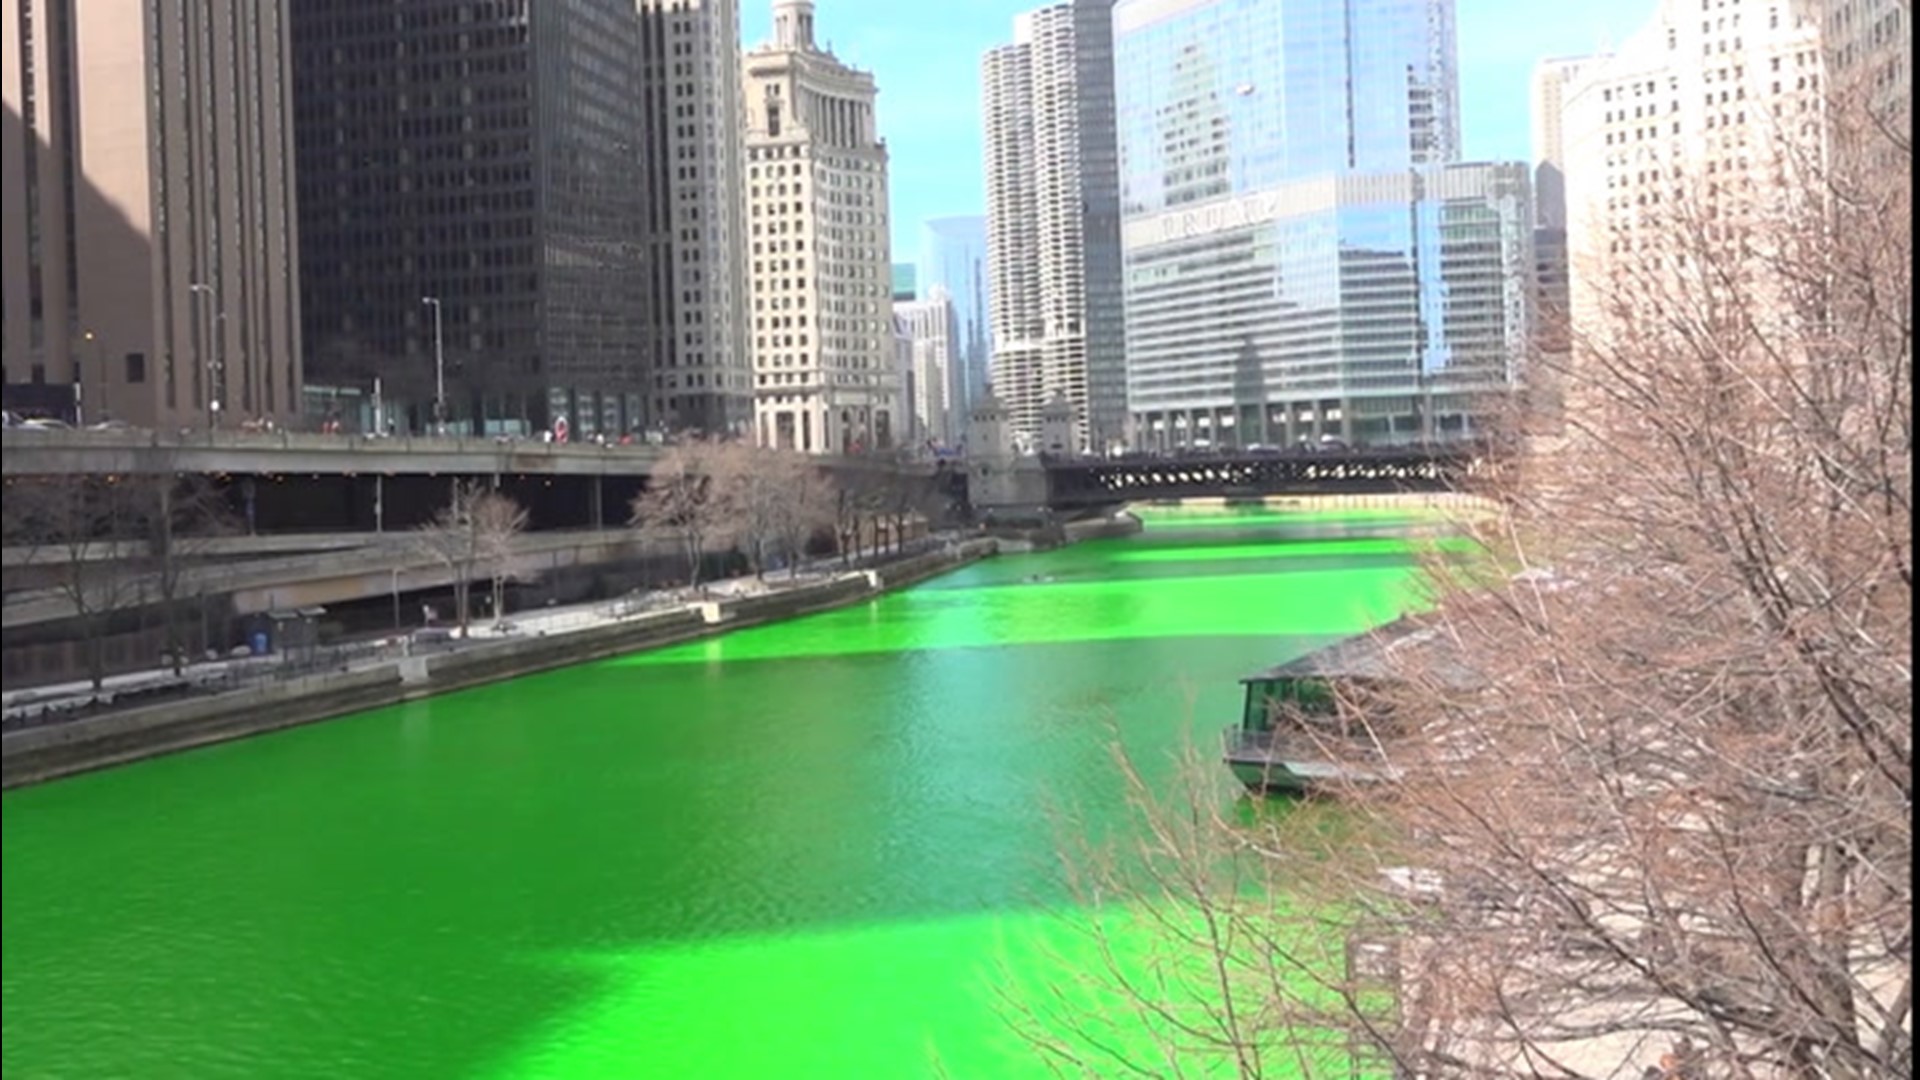 After the city of Chicago announced that they wouldn't dye the Chicago River green for St. Patrick's Day for the second year in a row due to COVID-19, they did it anyway, early in the morning of March 13 to prevent crowds.